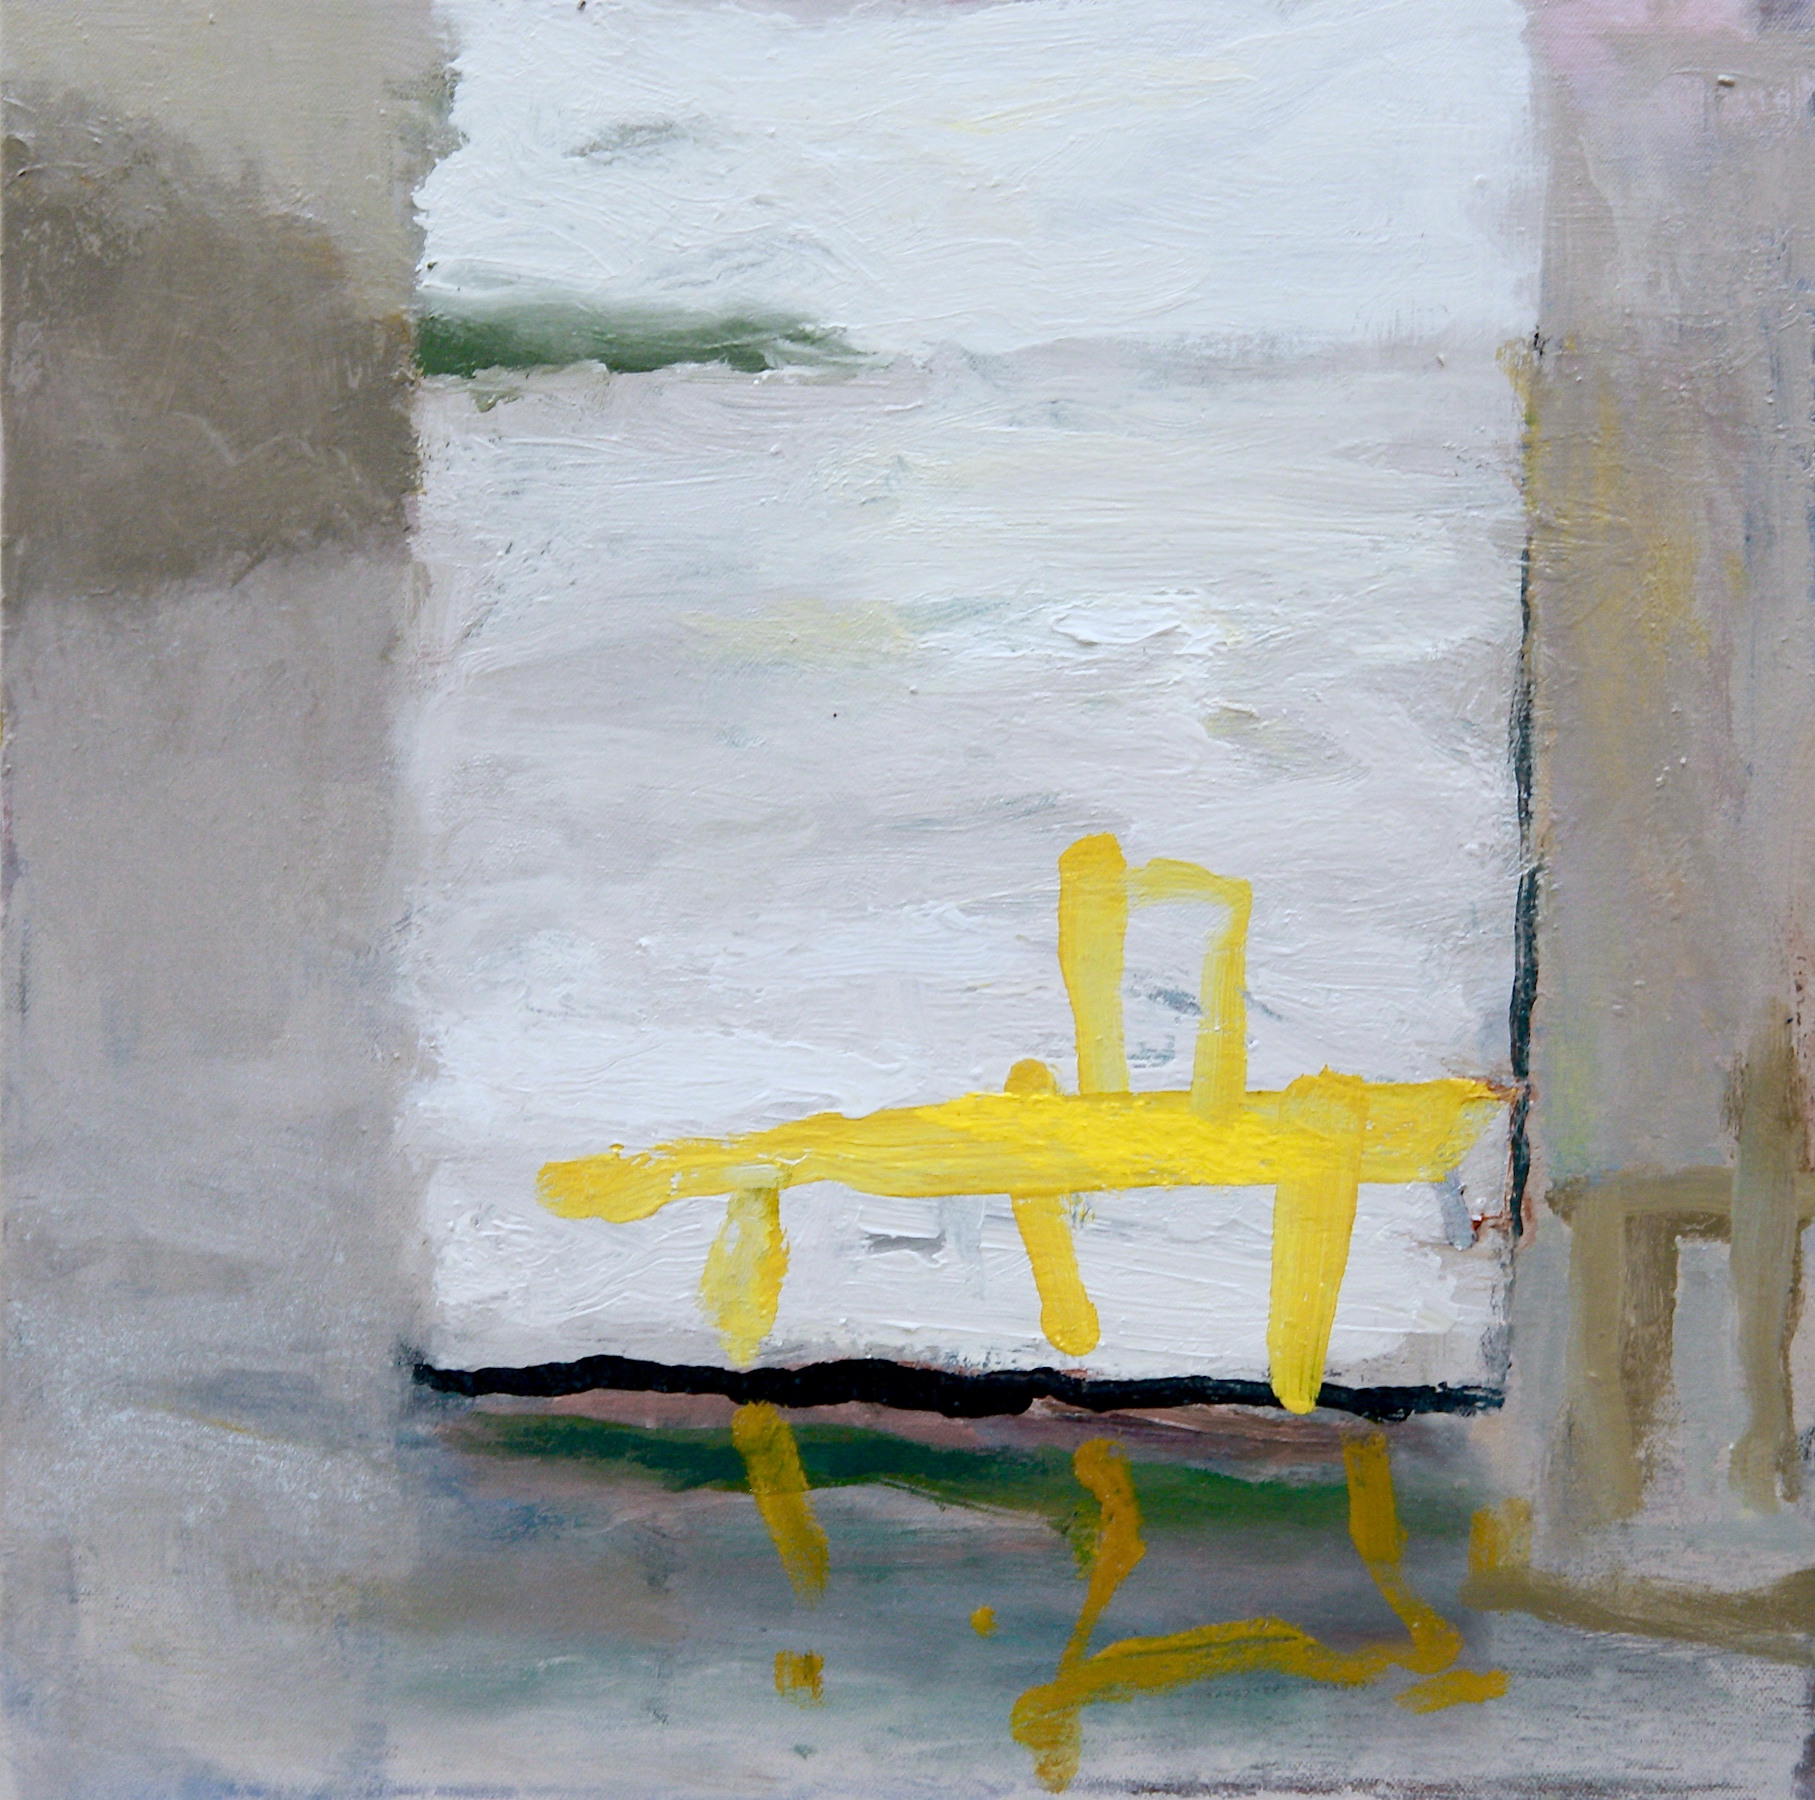 David Collins 'The Jetty Room' oil on canvas 40 x 40cm $2,400 SOLD